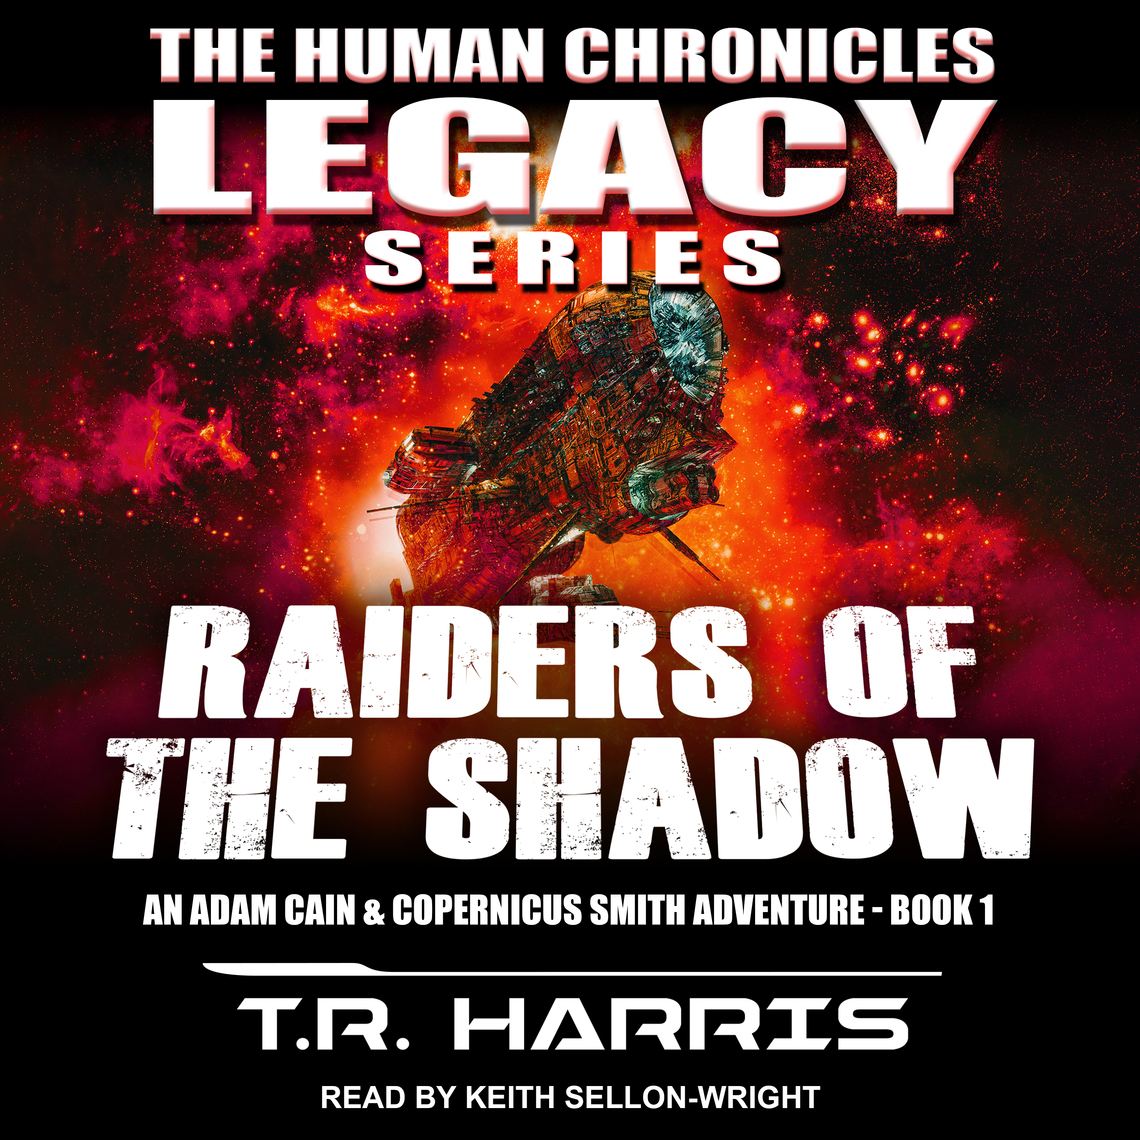 Raiders of the Shadow by T.R. Harris (Audiobook) - Read free for 30 days